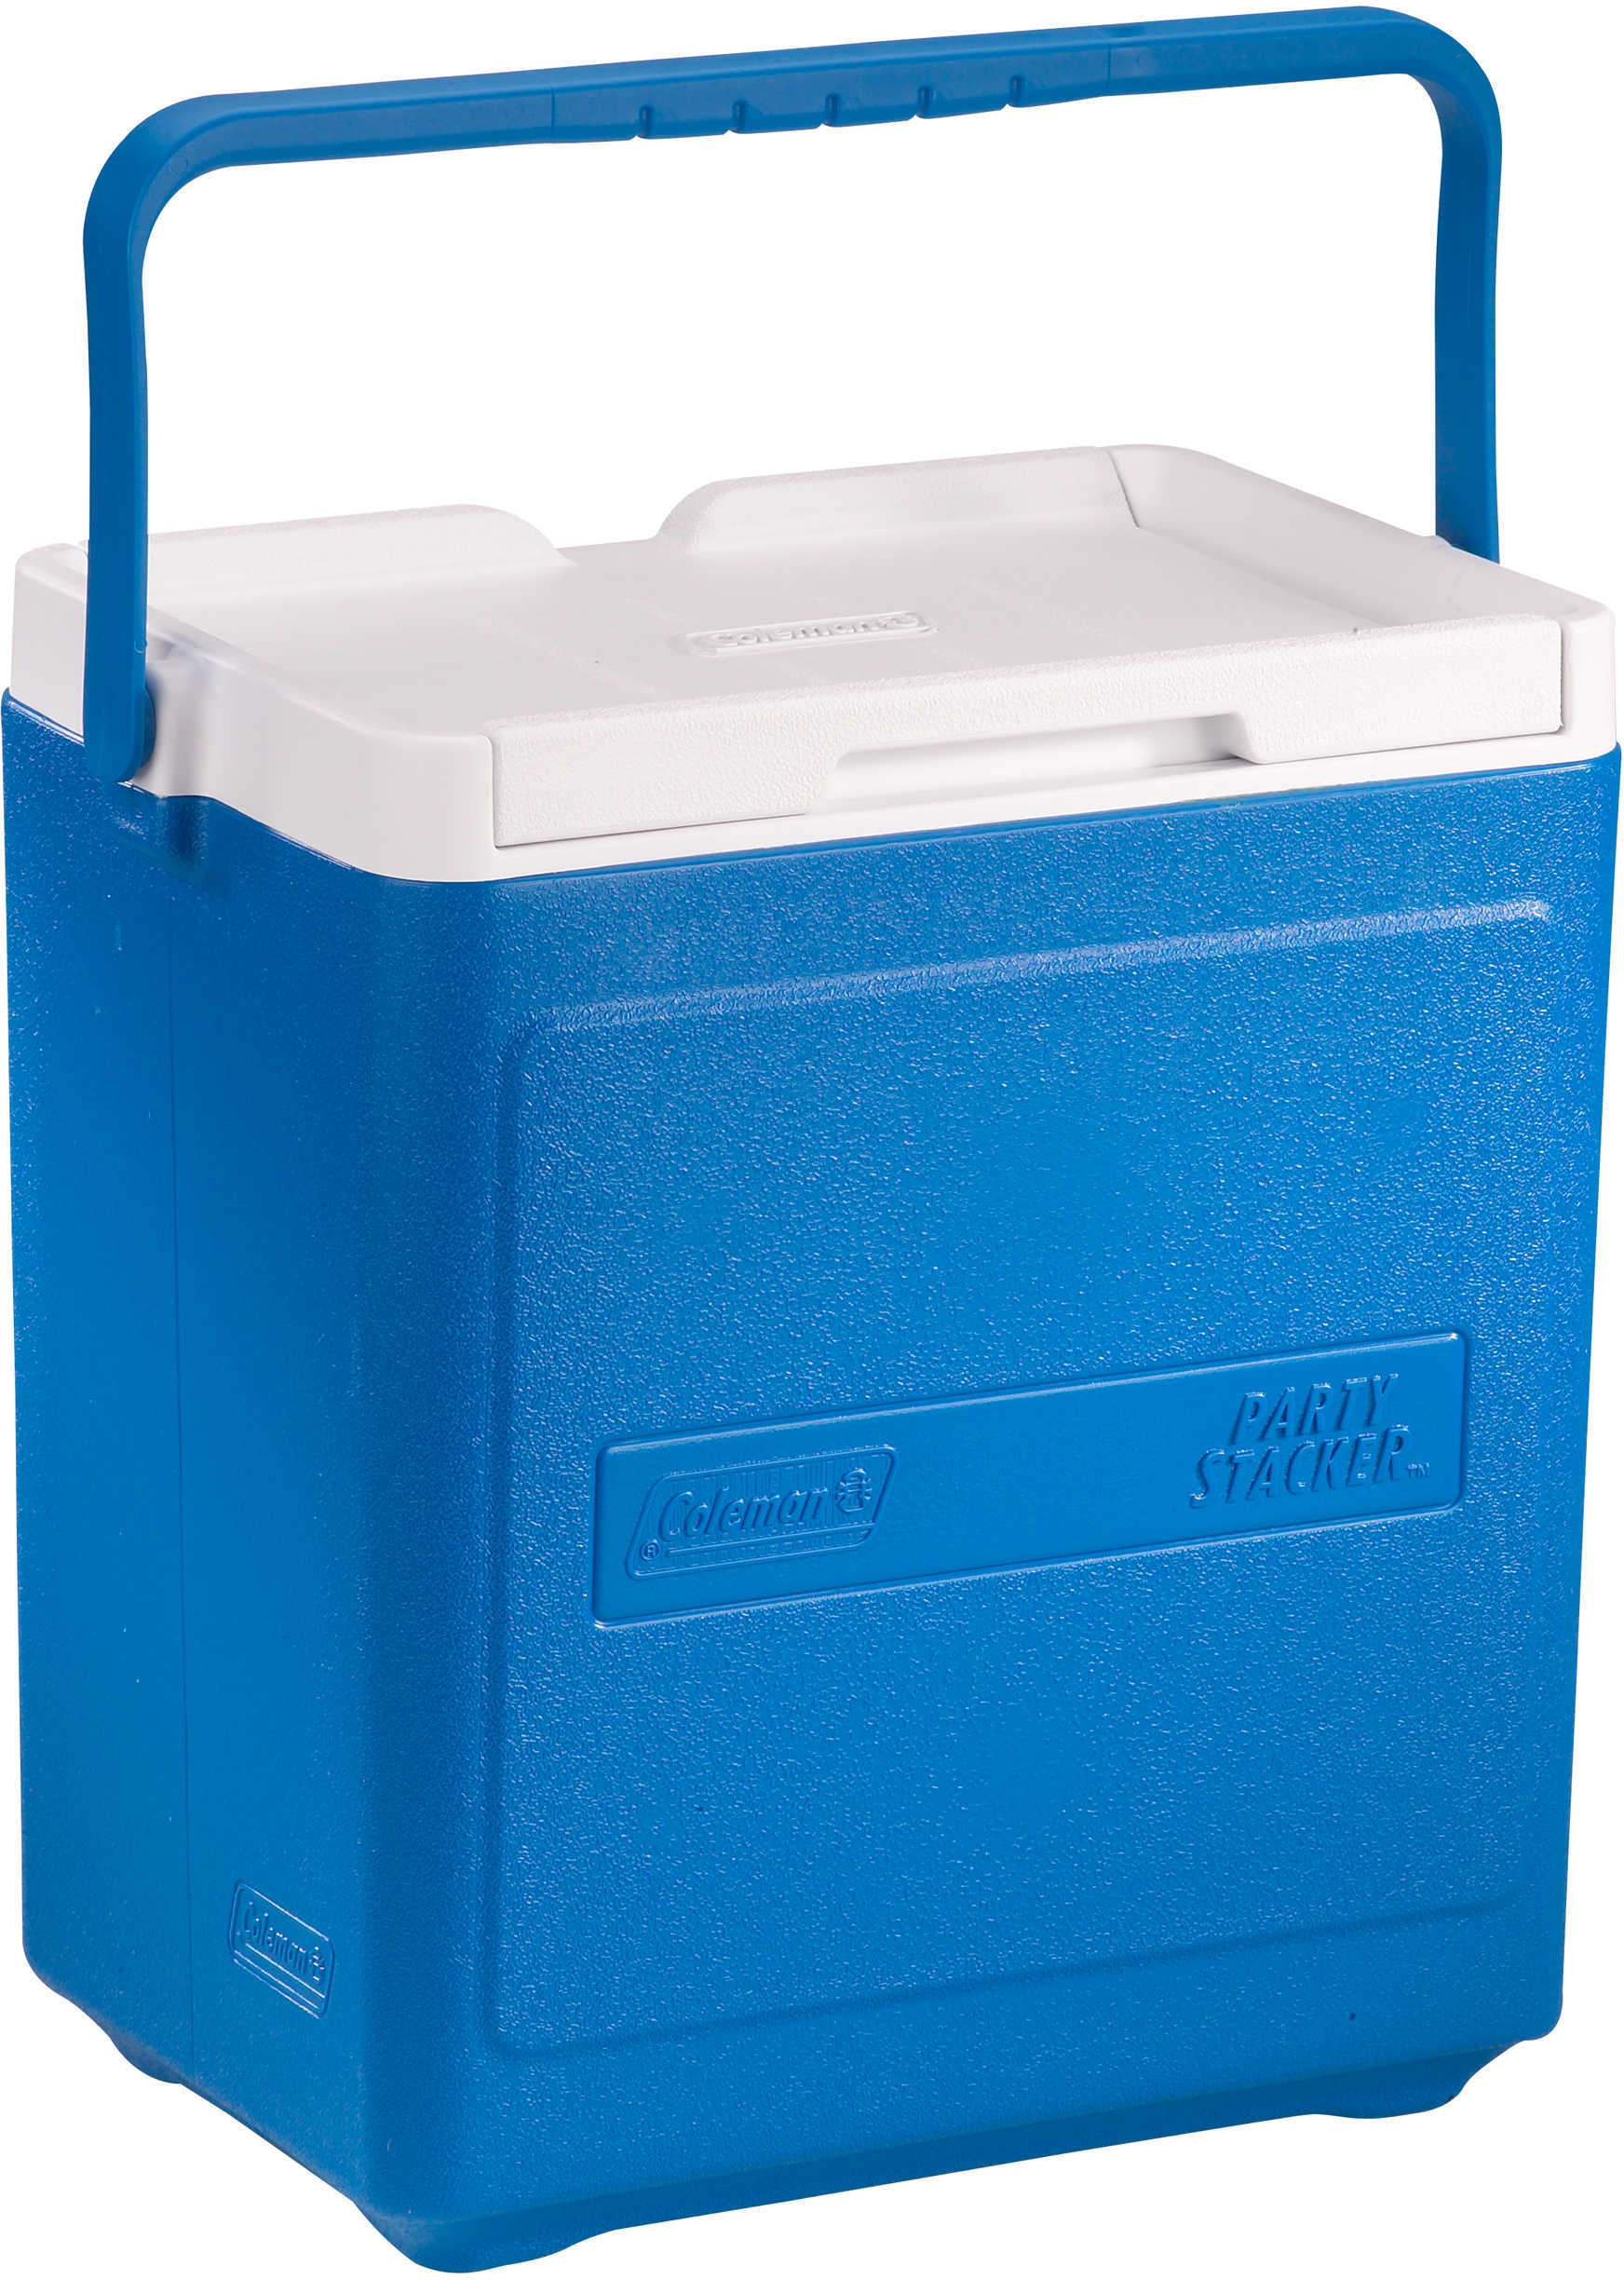 Coleman Cooler, 20 Can Stacker Blue Md: 3000000485